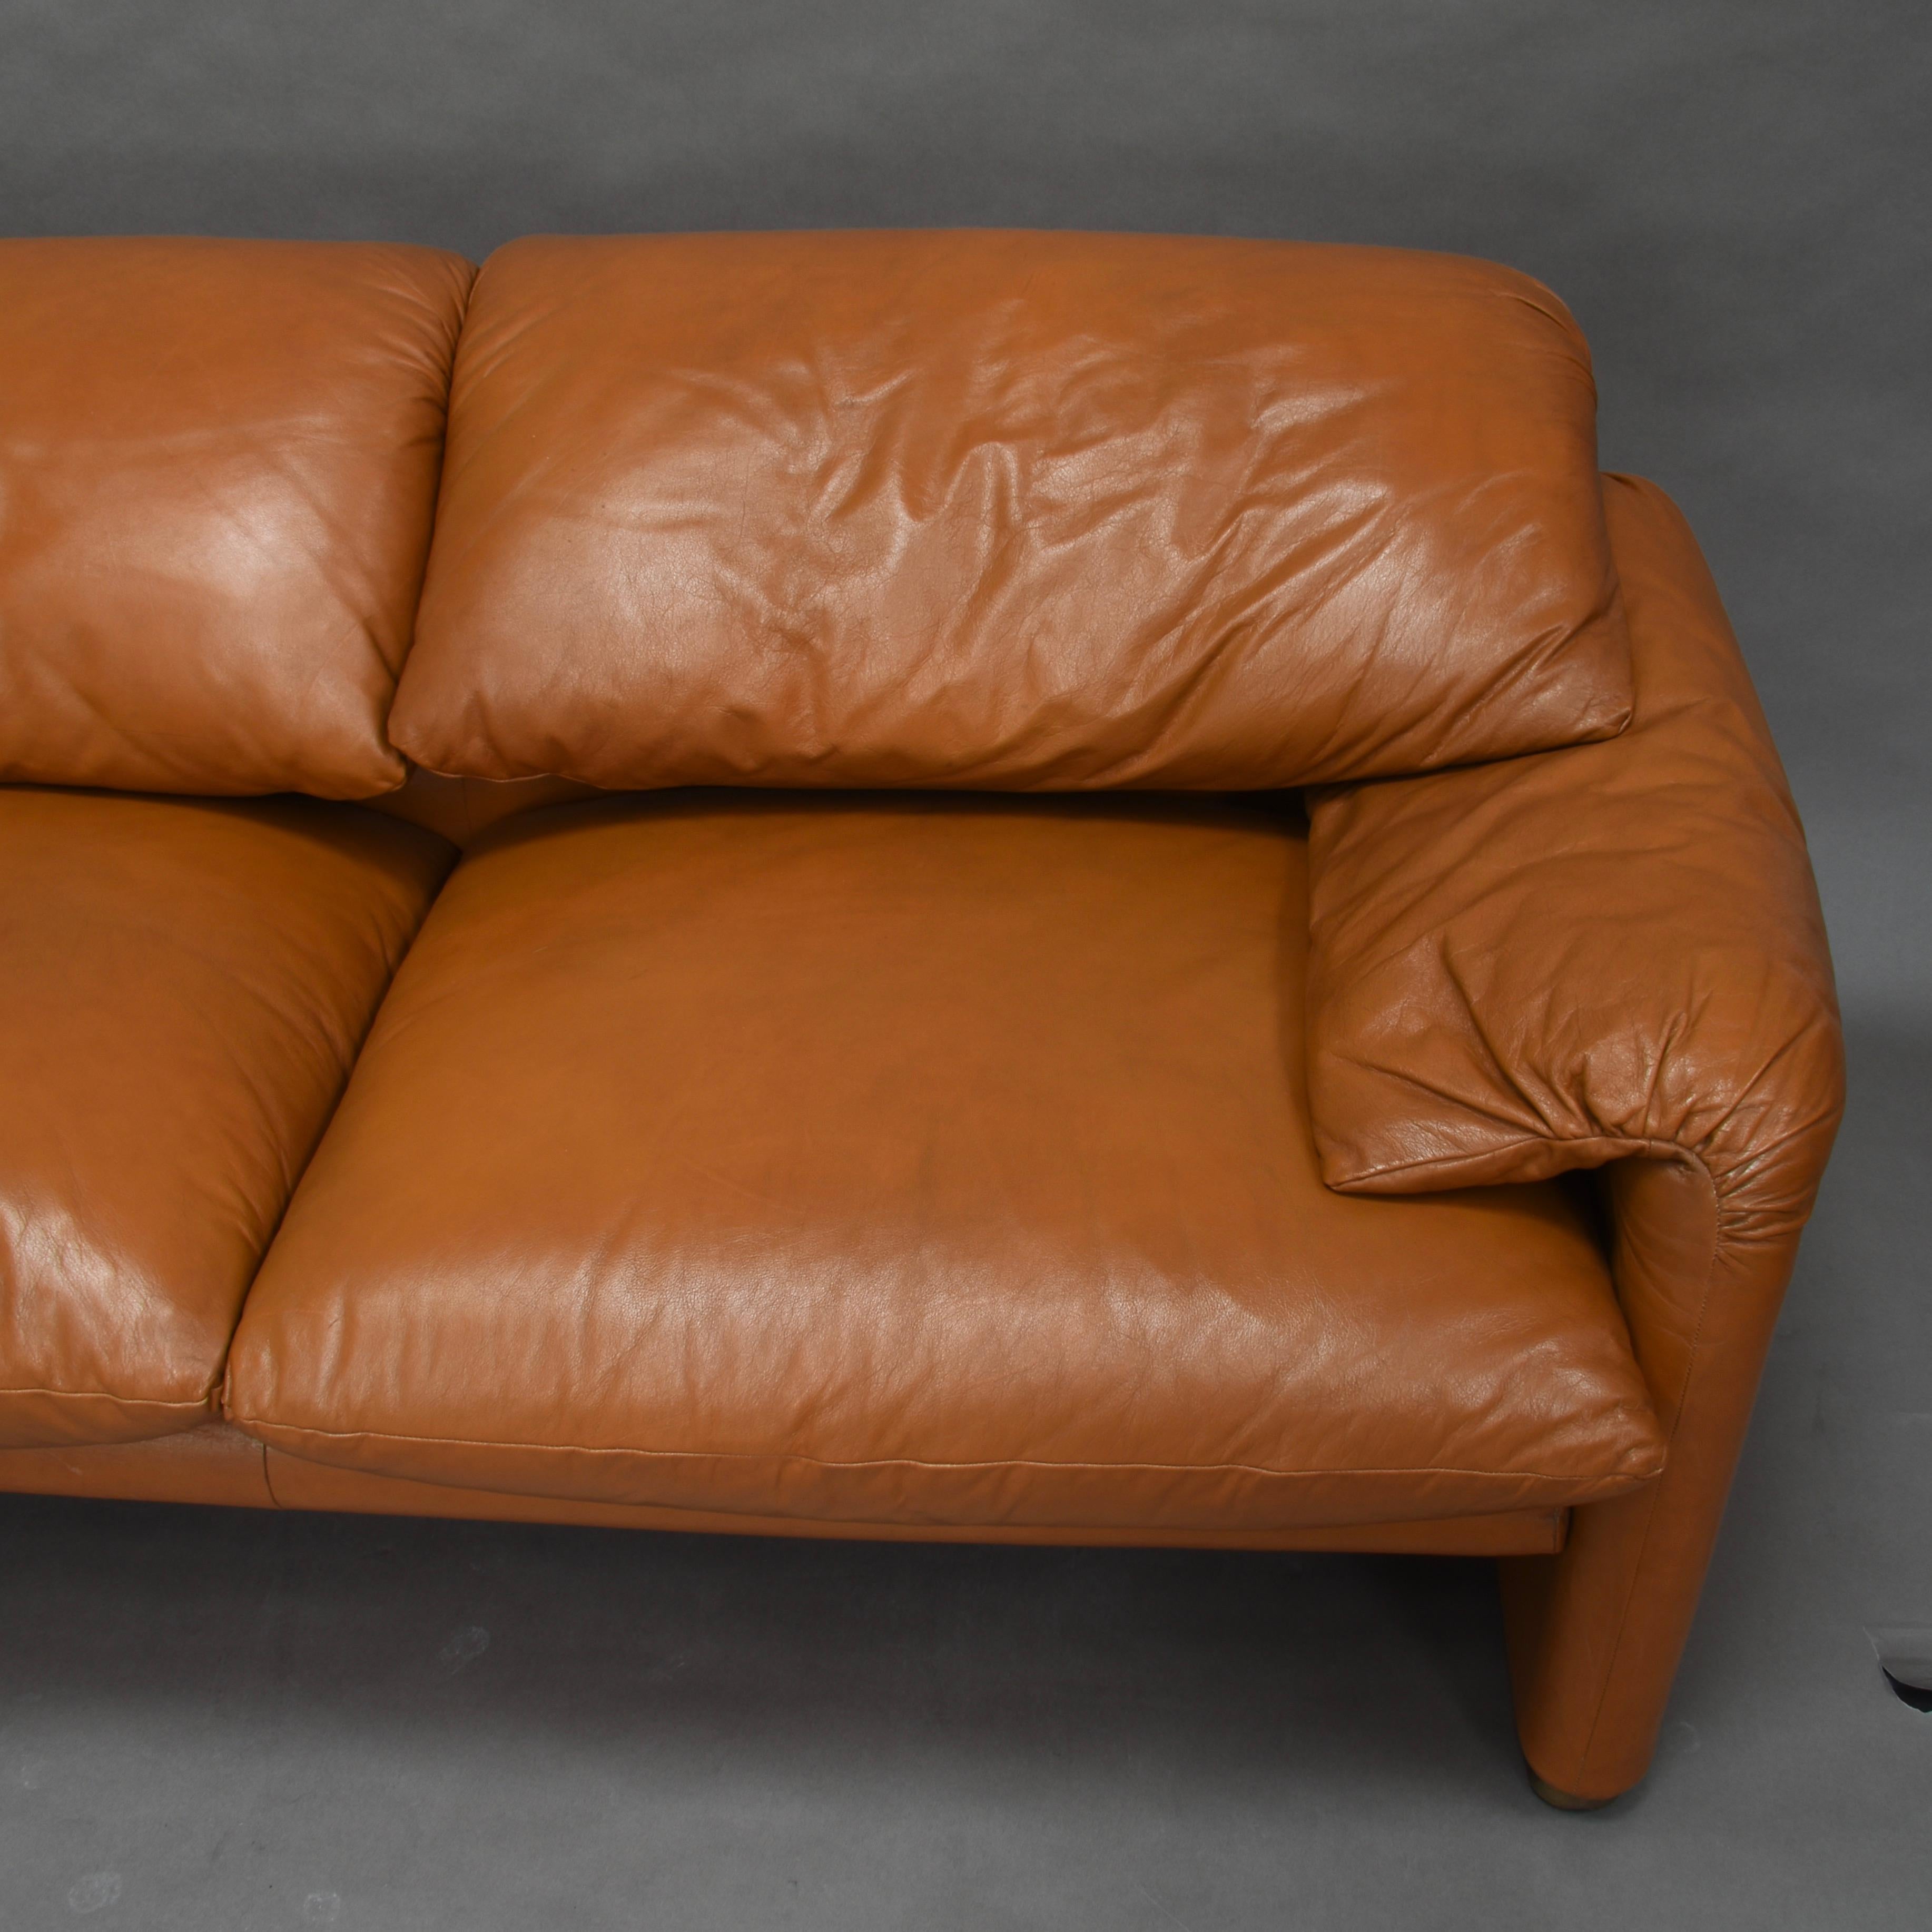 Early Maralunga Sofa in Tan Leather by Vico Magistretti for Cassina, Italy, 1973 2